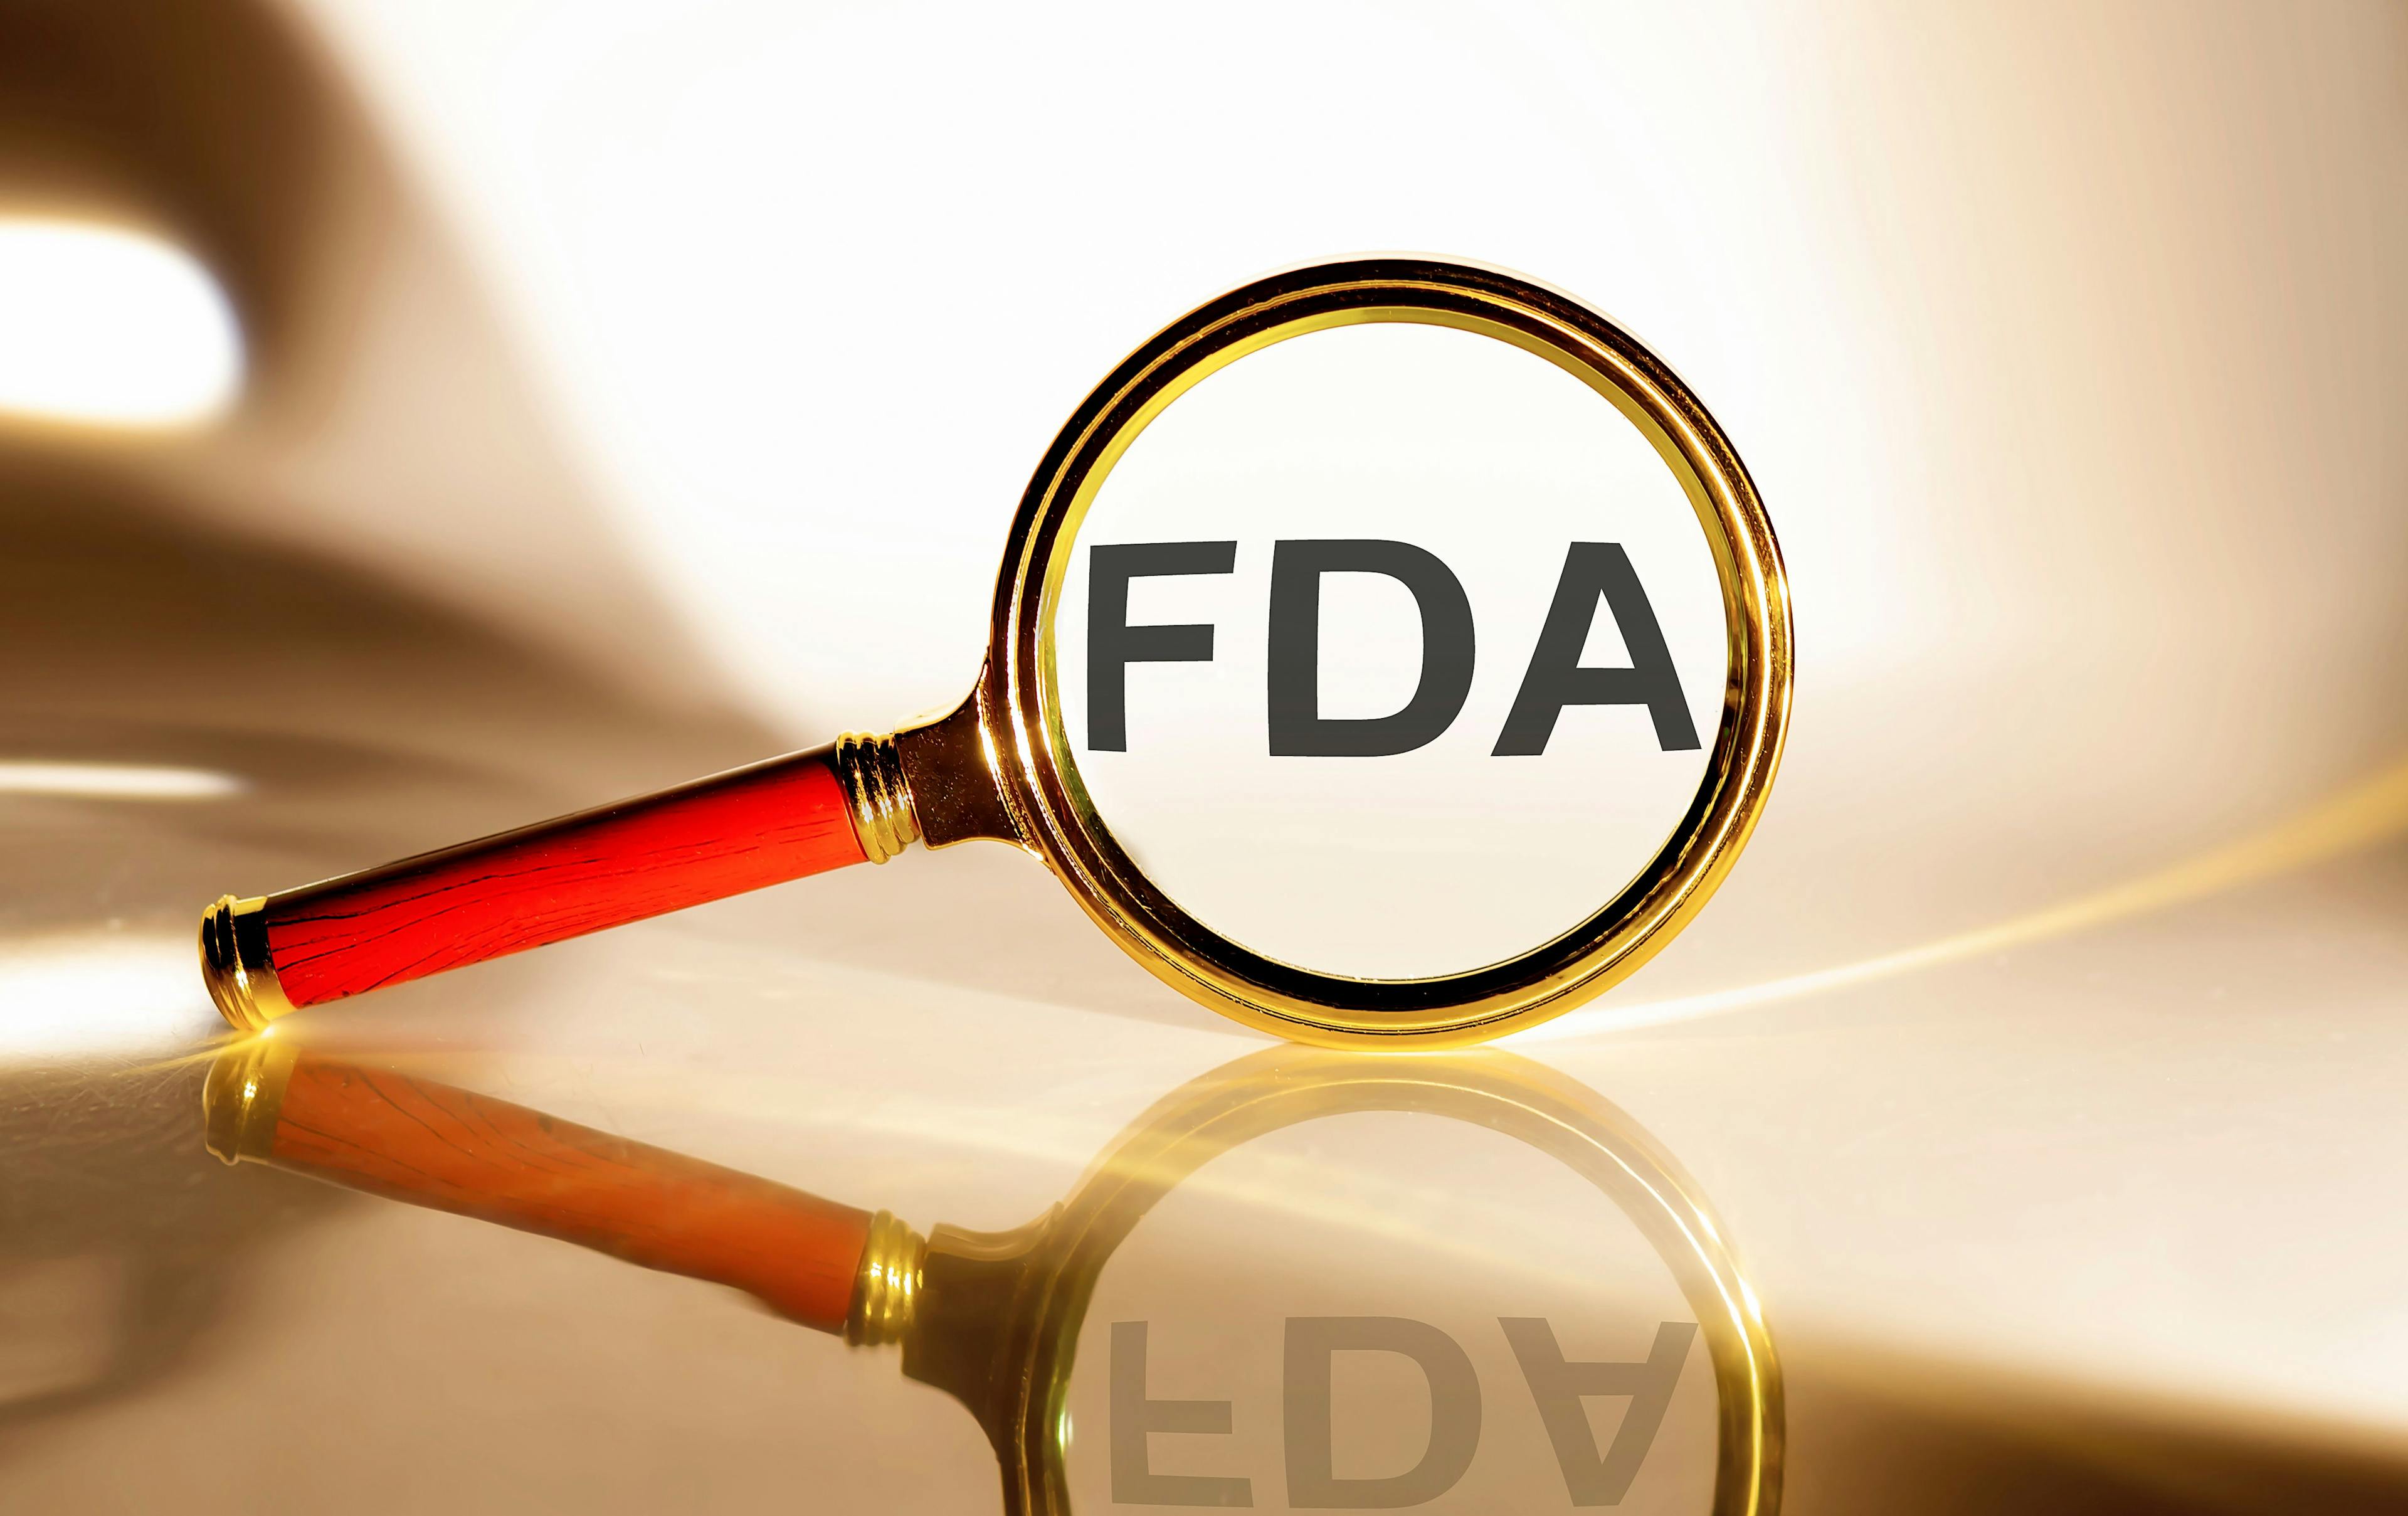 FDA approves Xofluza for treatment of influenza in children 5 years and older